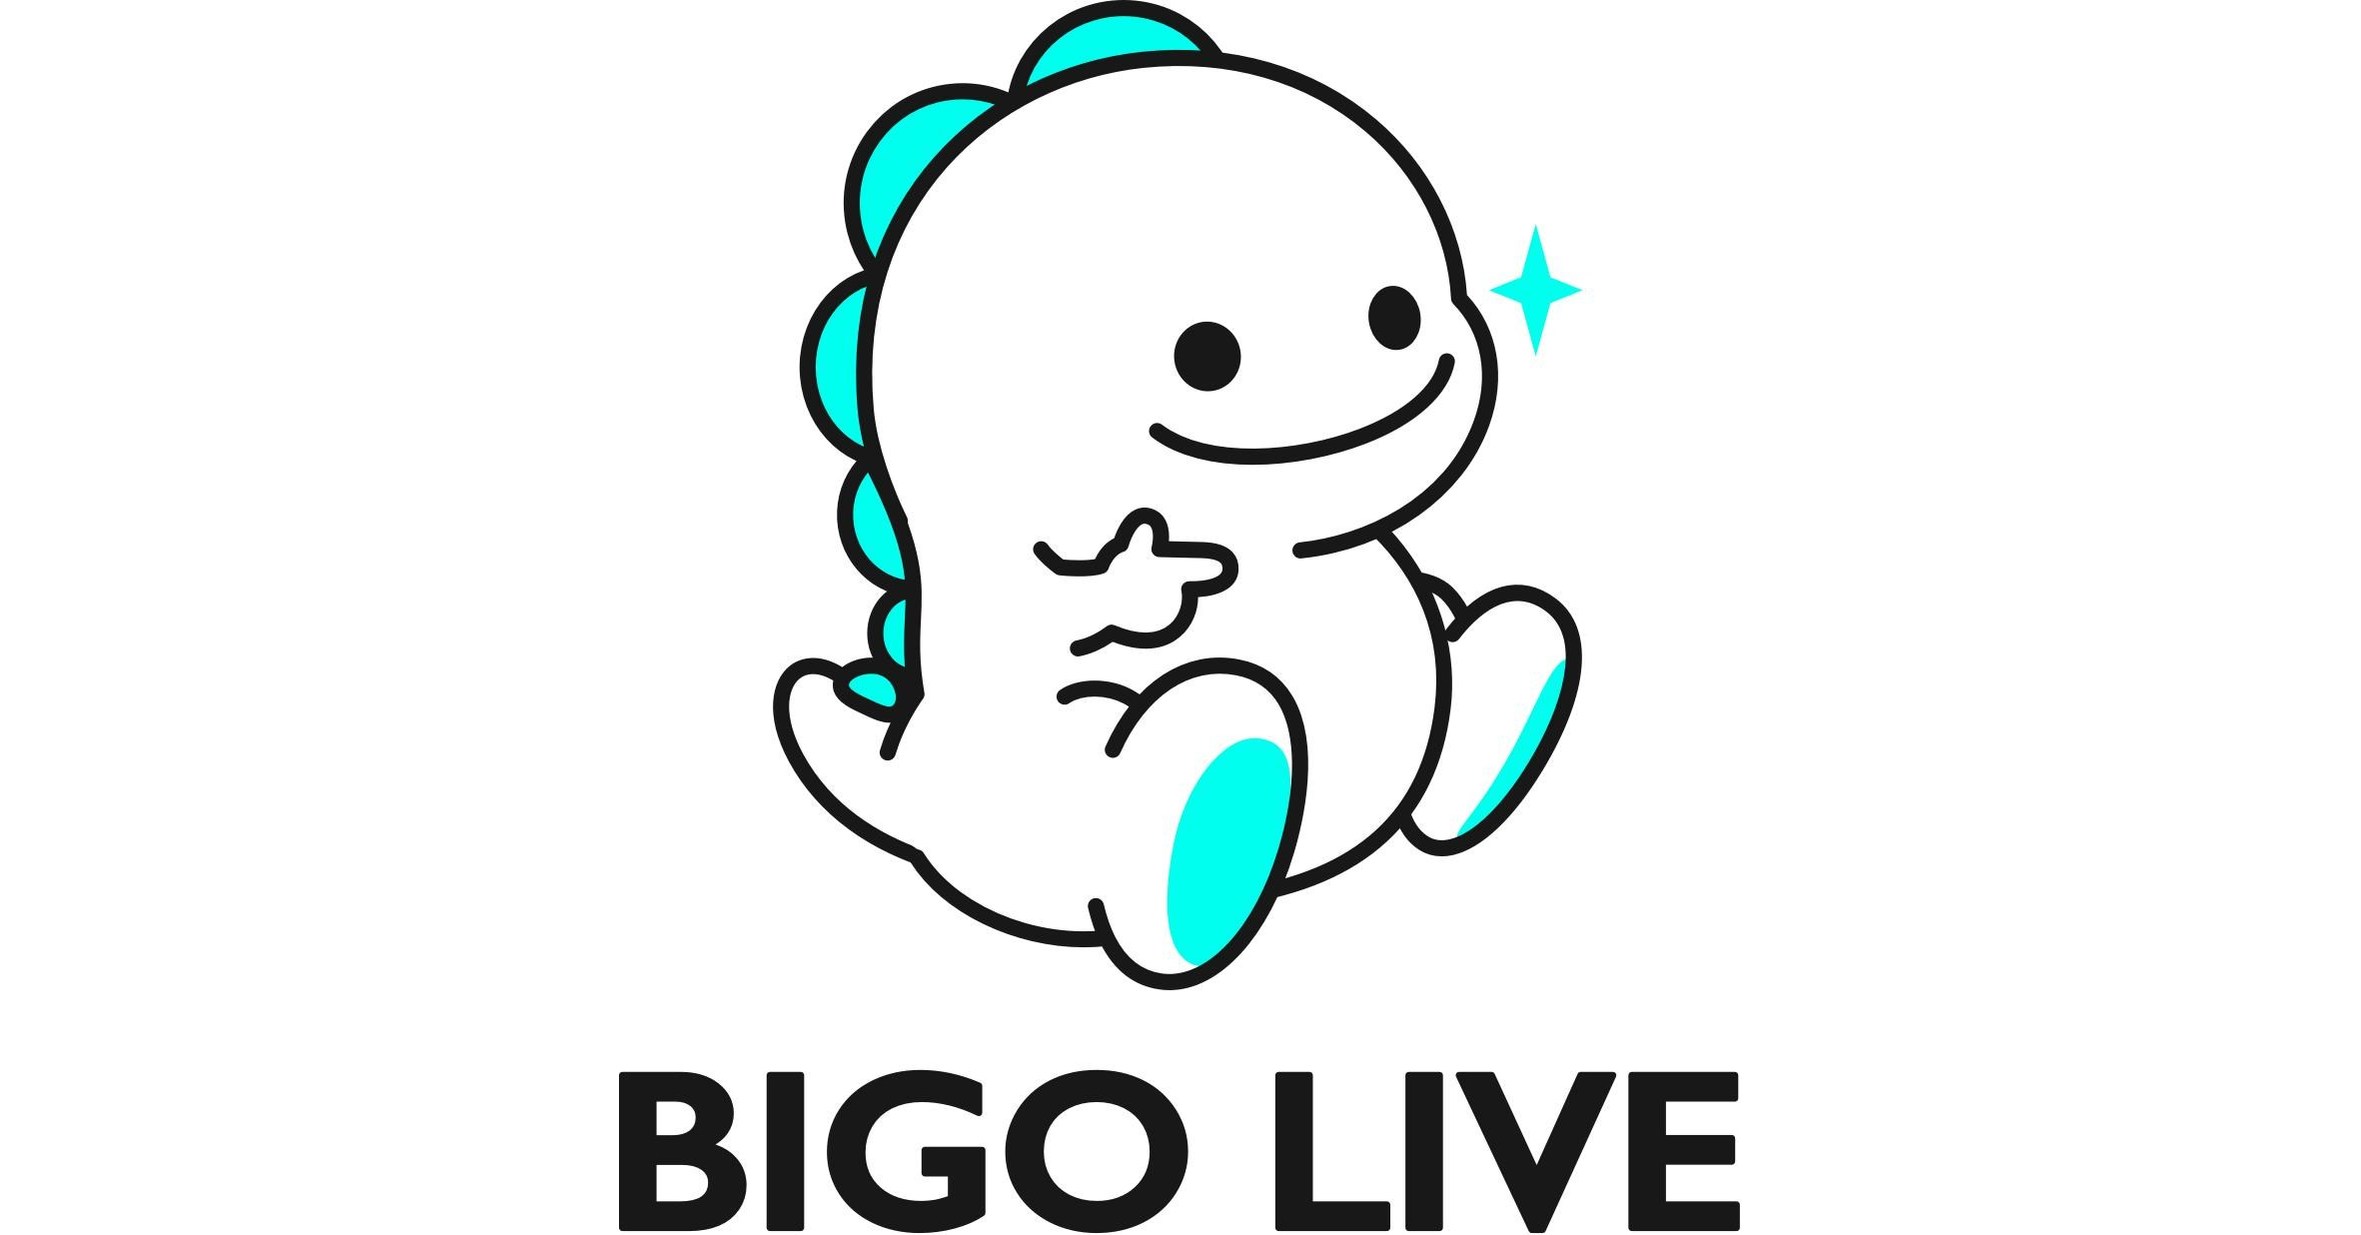 All You Need To Know About The BIGO Live App